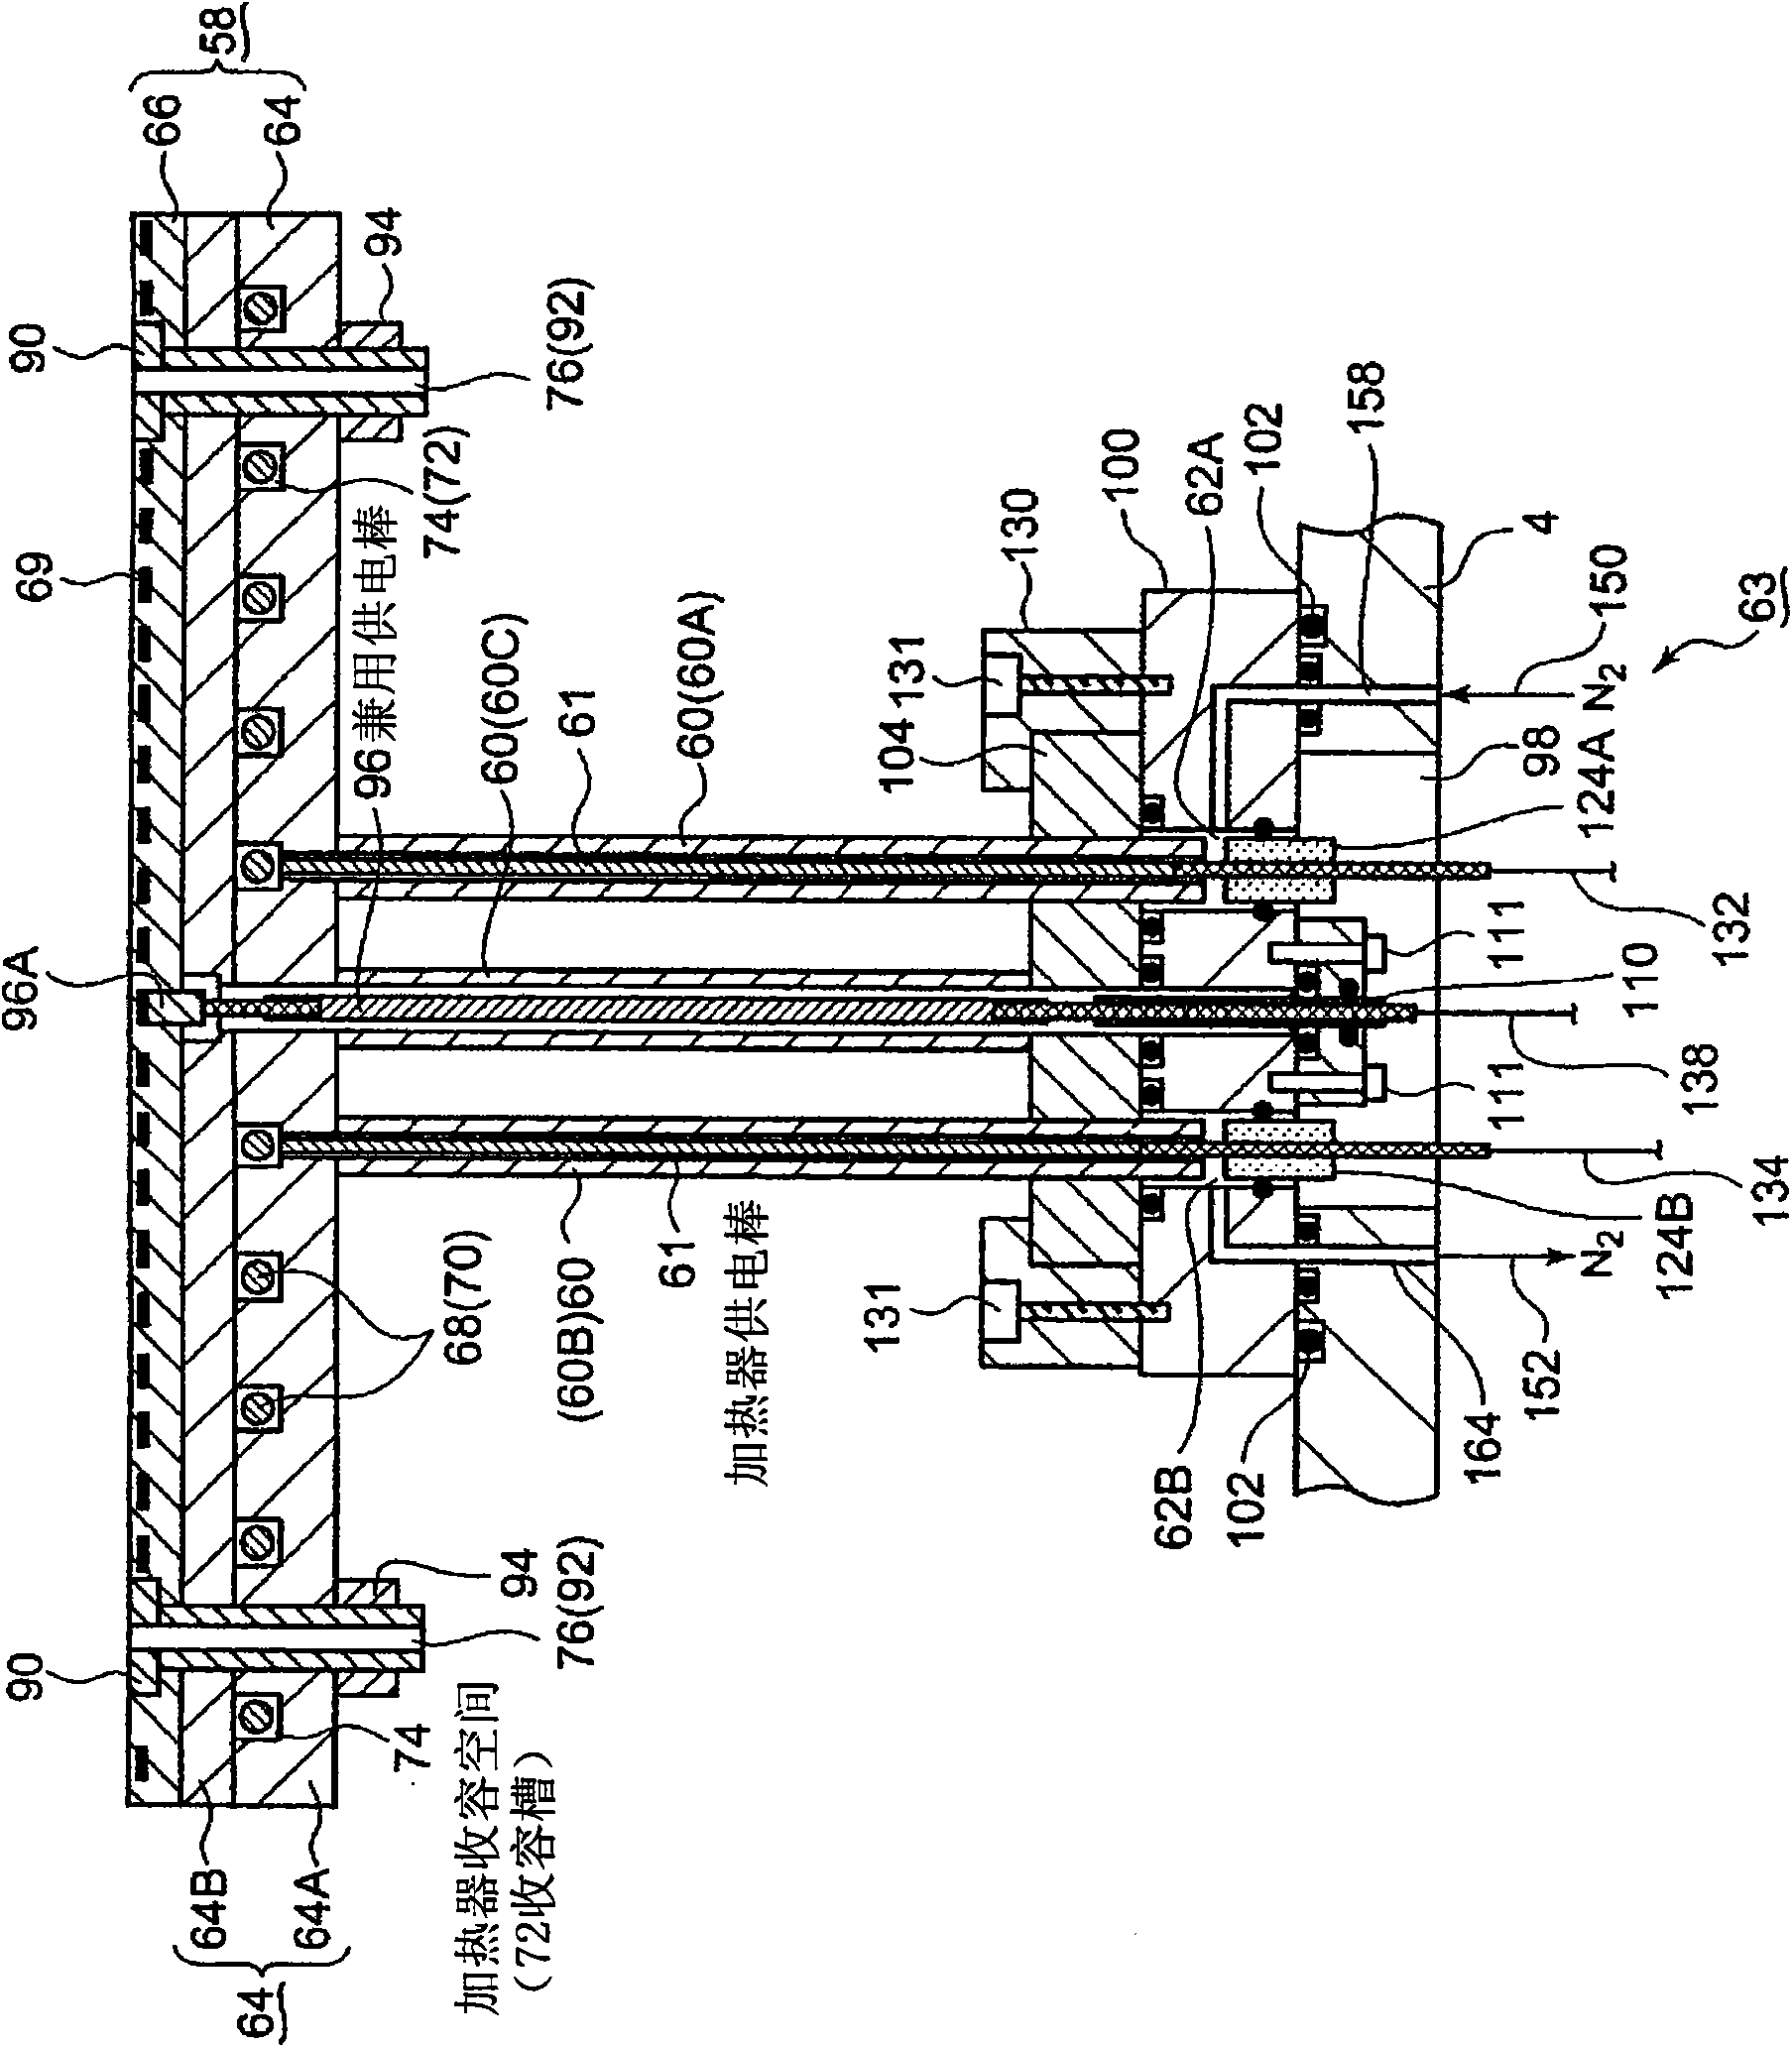 Susceptor structure and processing apparatus